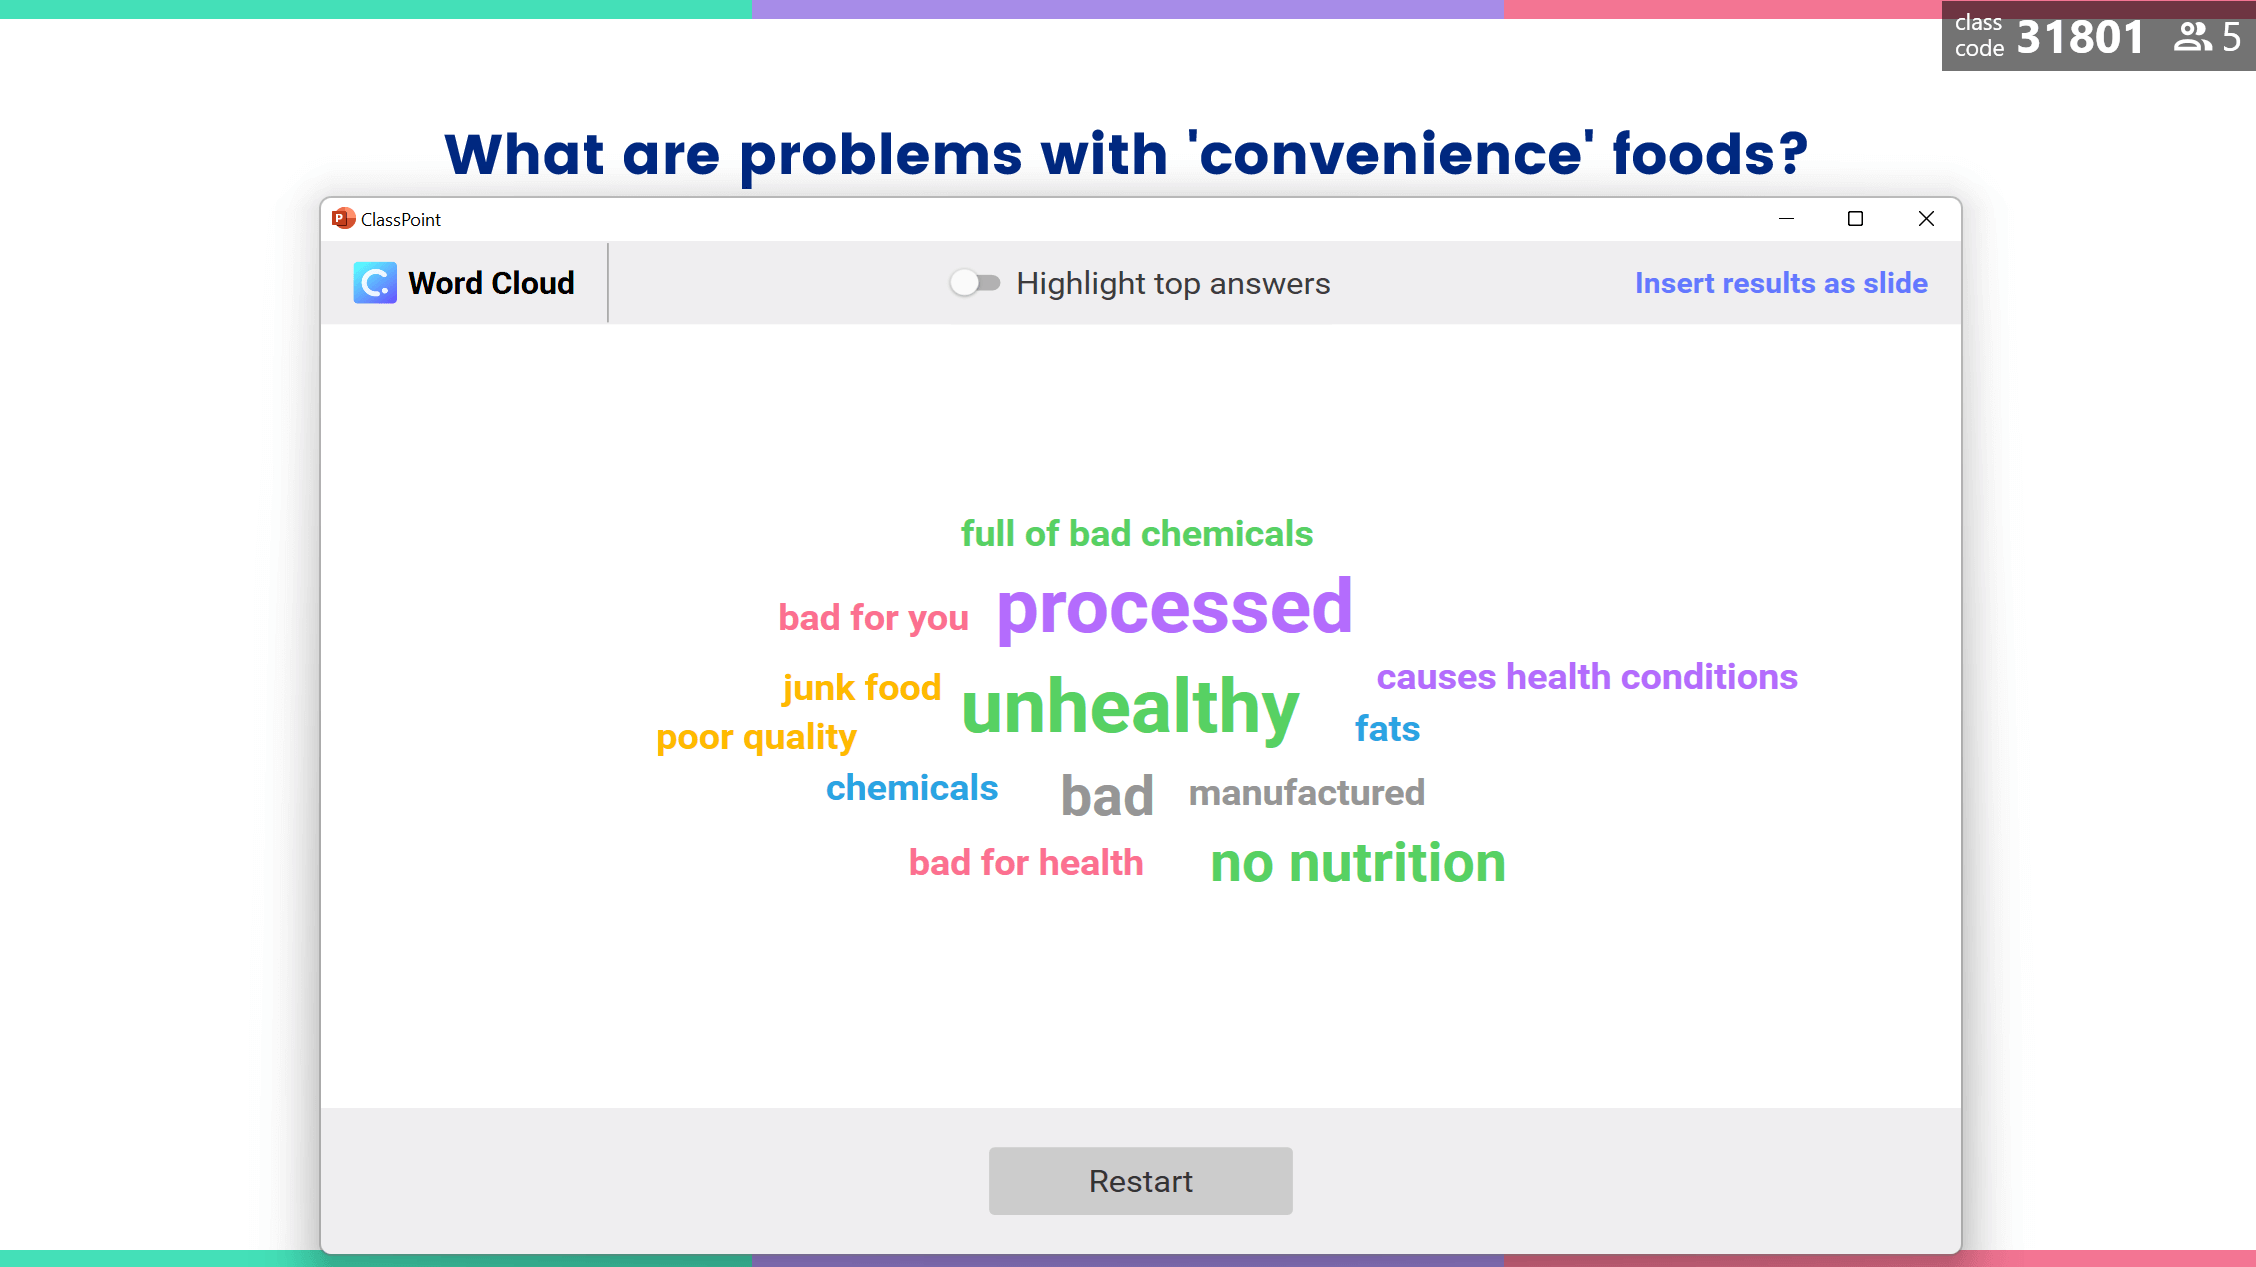 Word Cloud activity: What are problems with convenience foods?